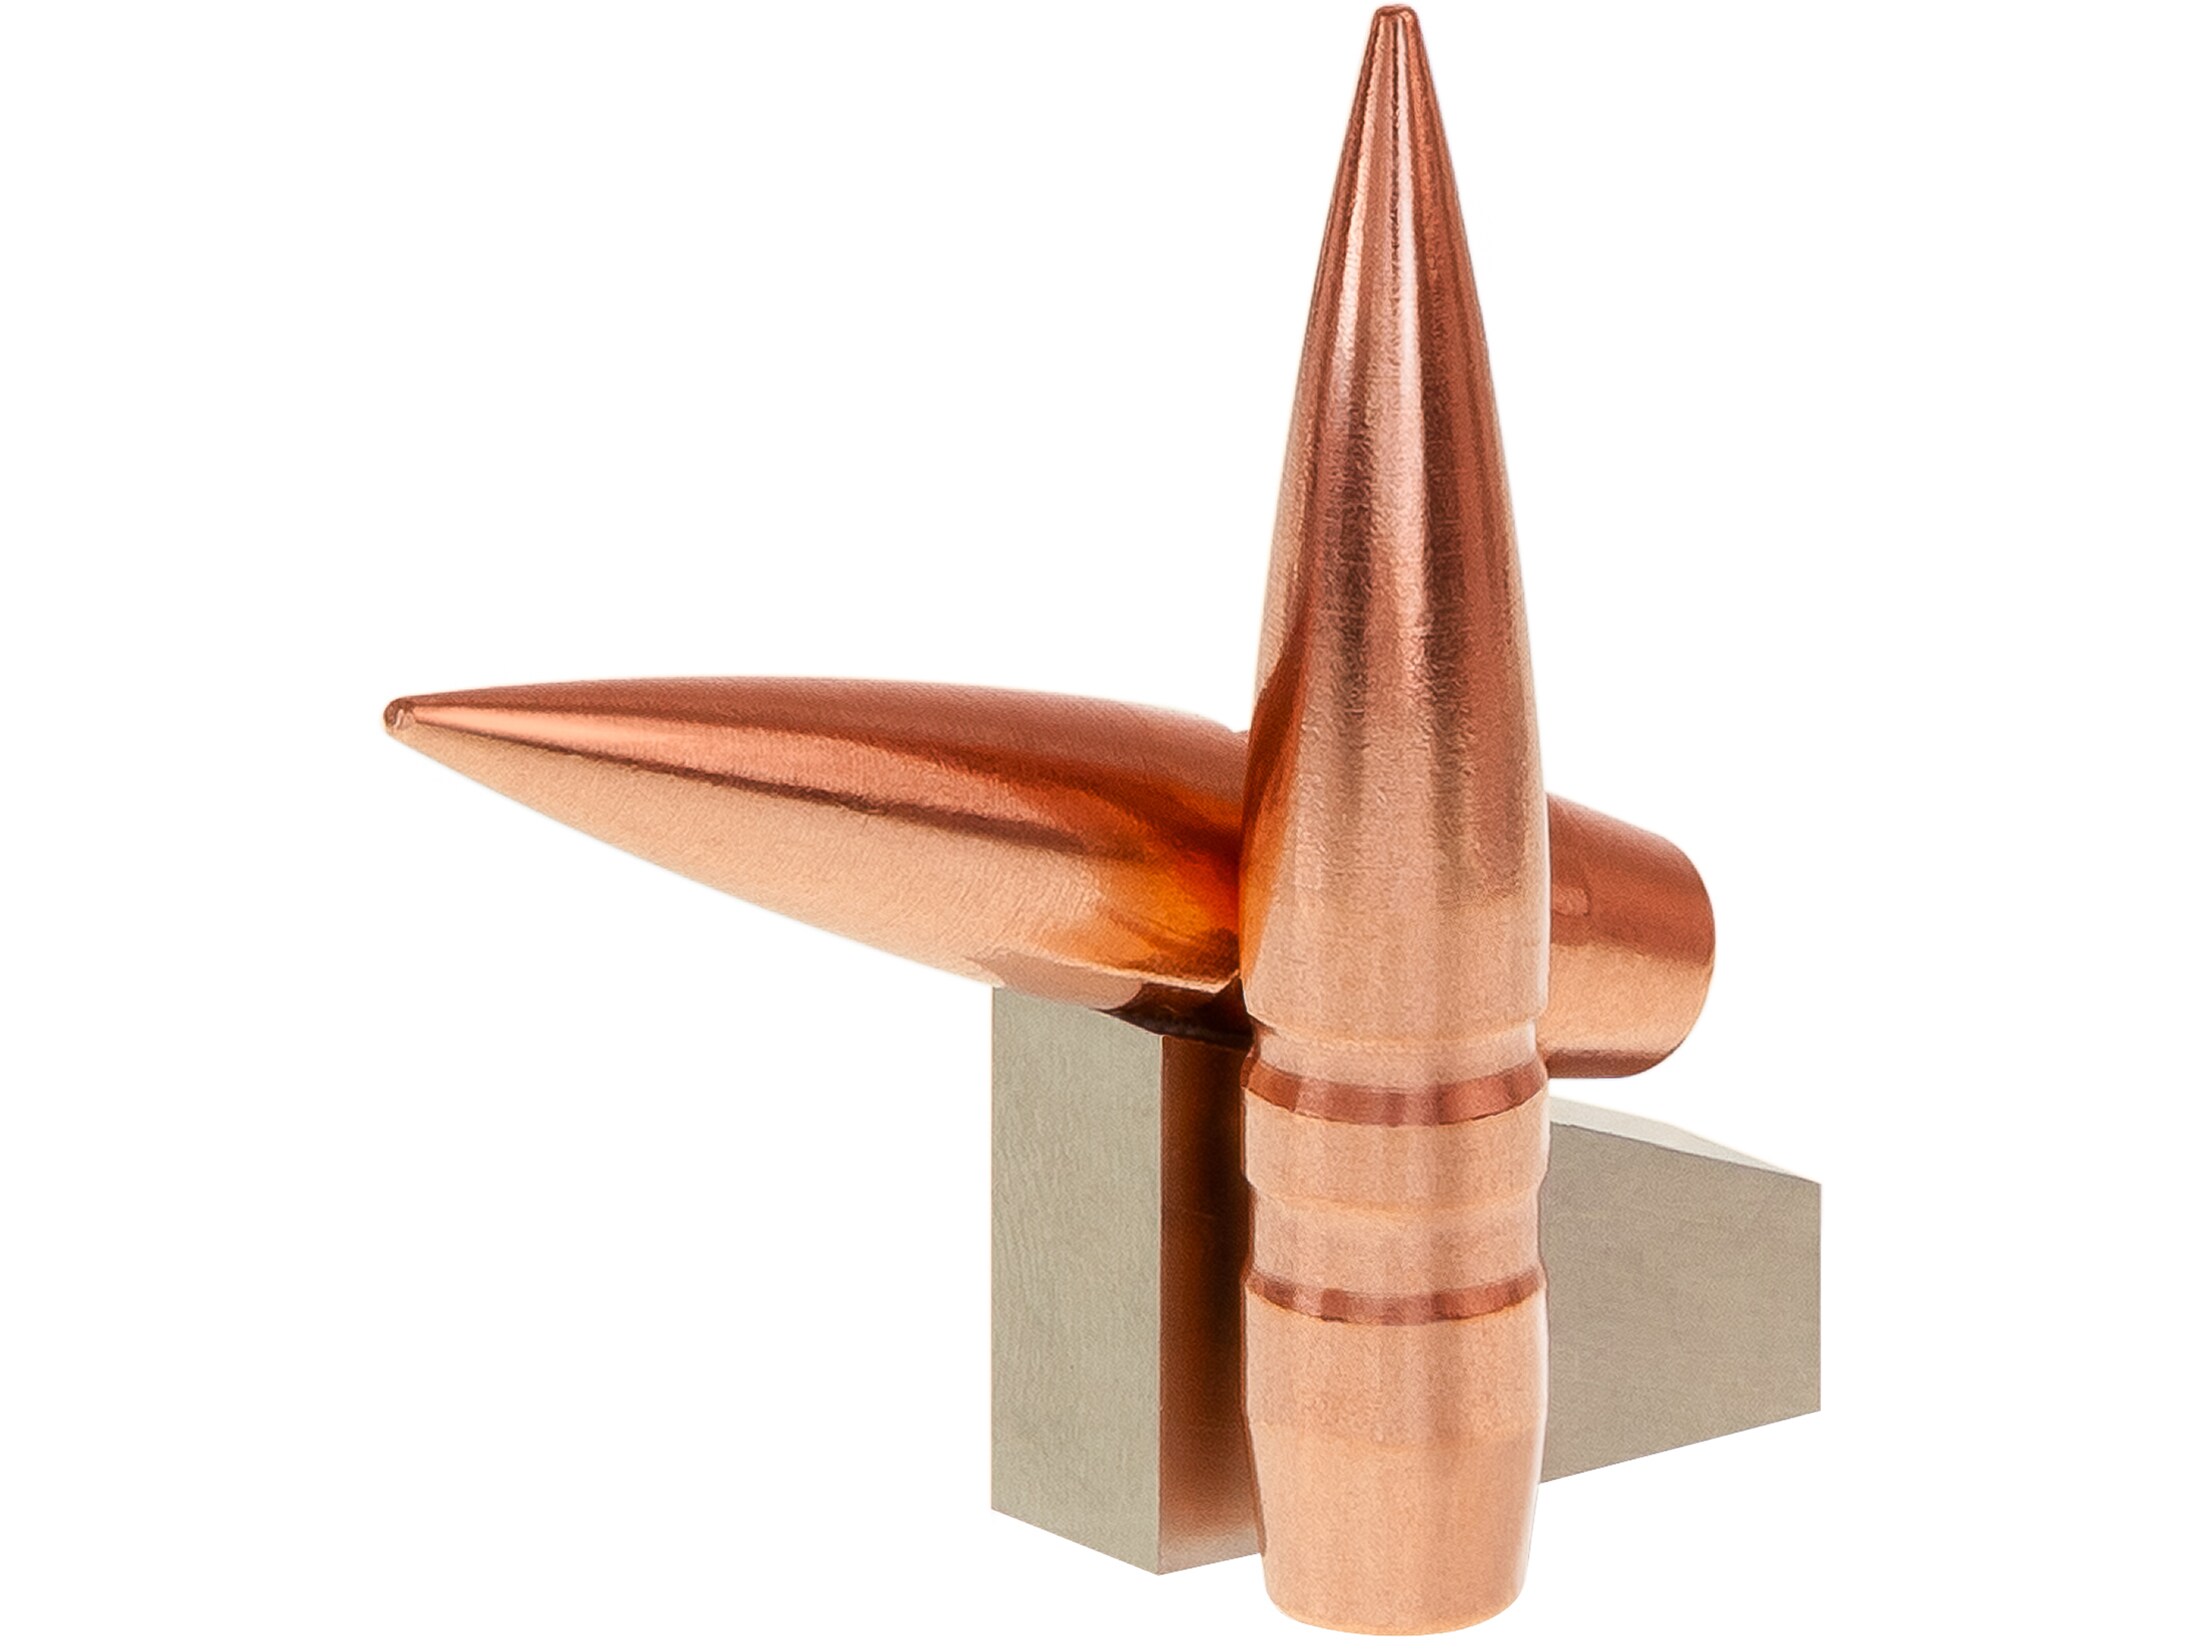 Lehigh Defense Match Solid Bullets 264 Caliber, 6.5mm (264 Diameter) 121 Grain Solid Copper Boat Tail Lead-Free